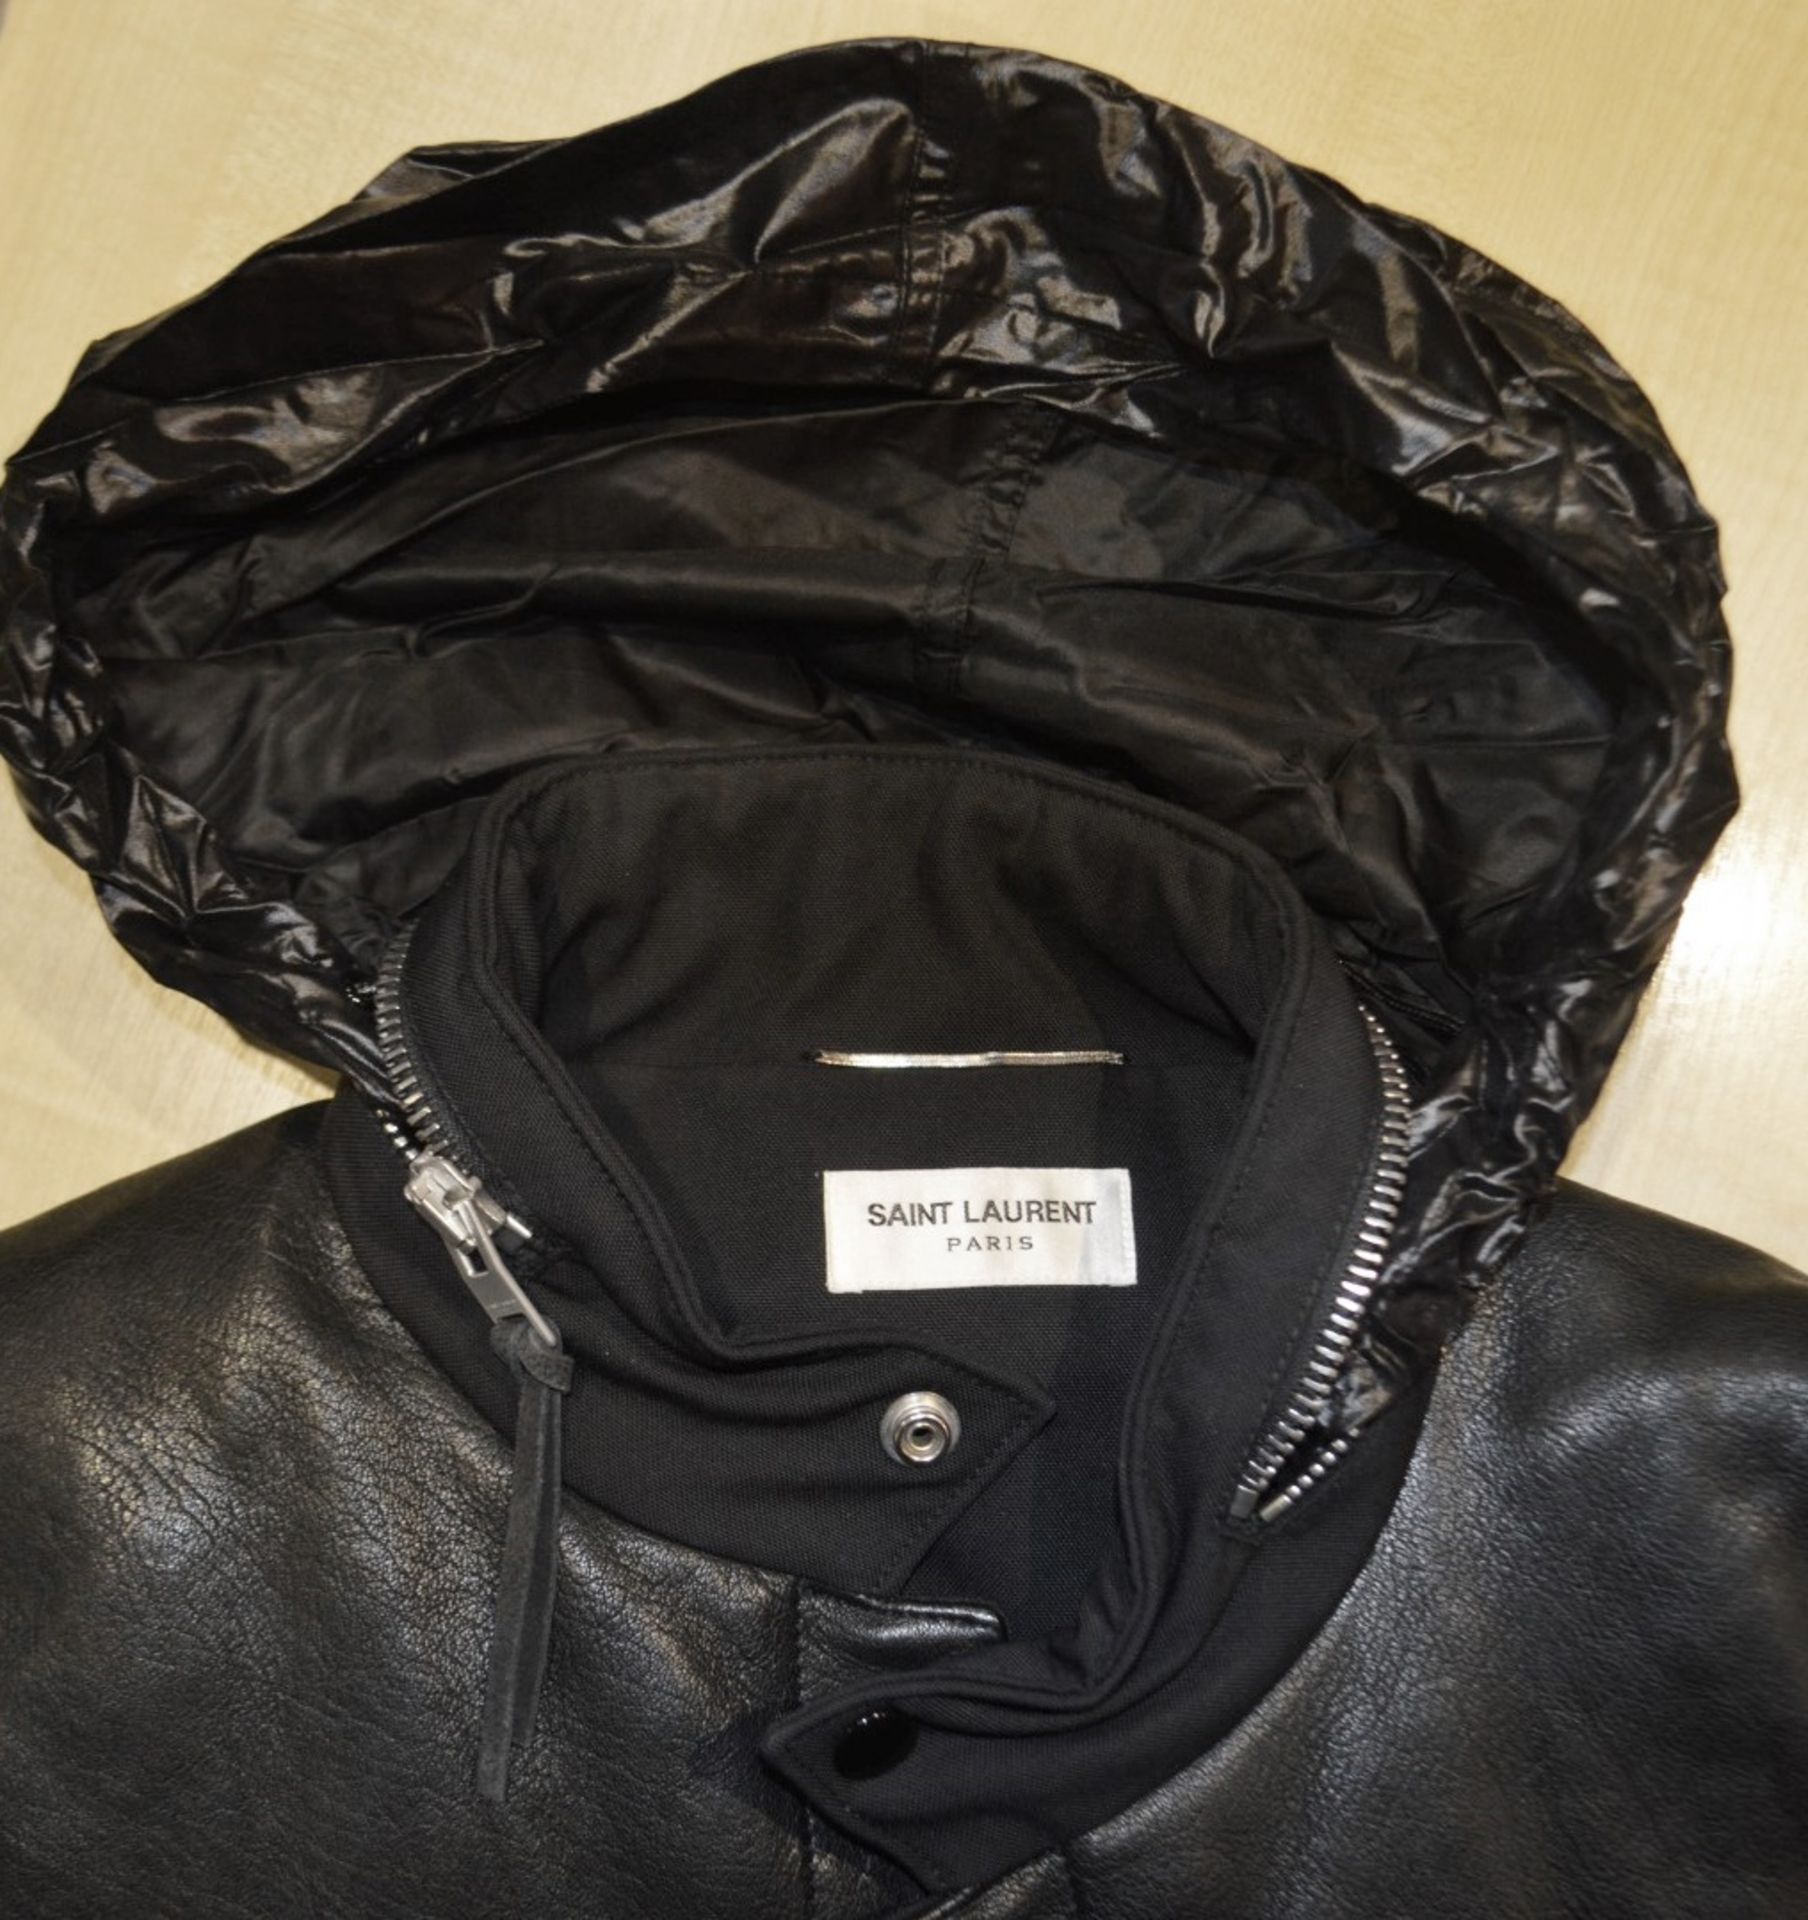 1 x Men's Genuine Yves Saint Laurant Gillet / Body Warmer In Black With Leather Panelling - Image 7 of 8